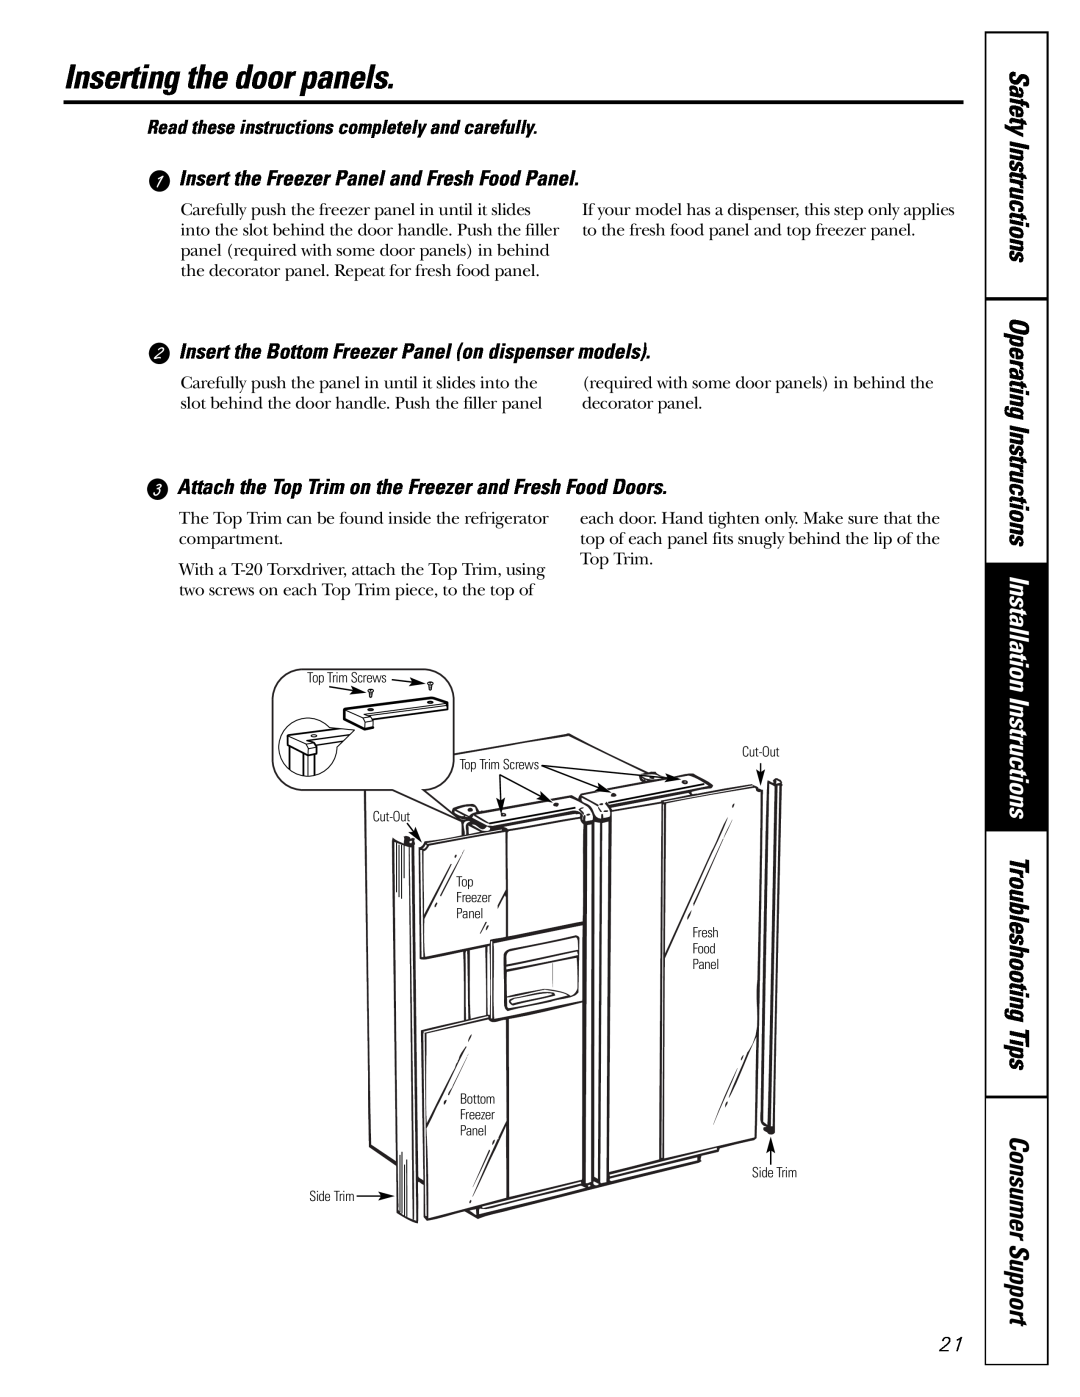 GE installation instructions Inserting the door panels, Insert the Freezer Panel and Fresh Food Panel 